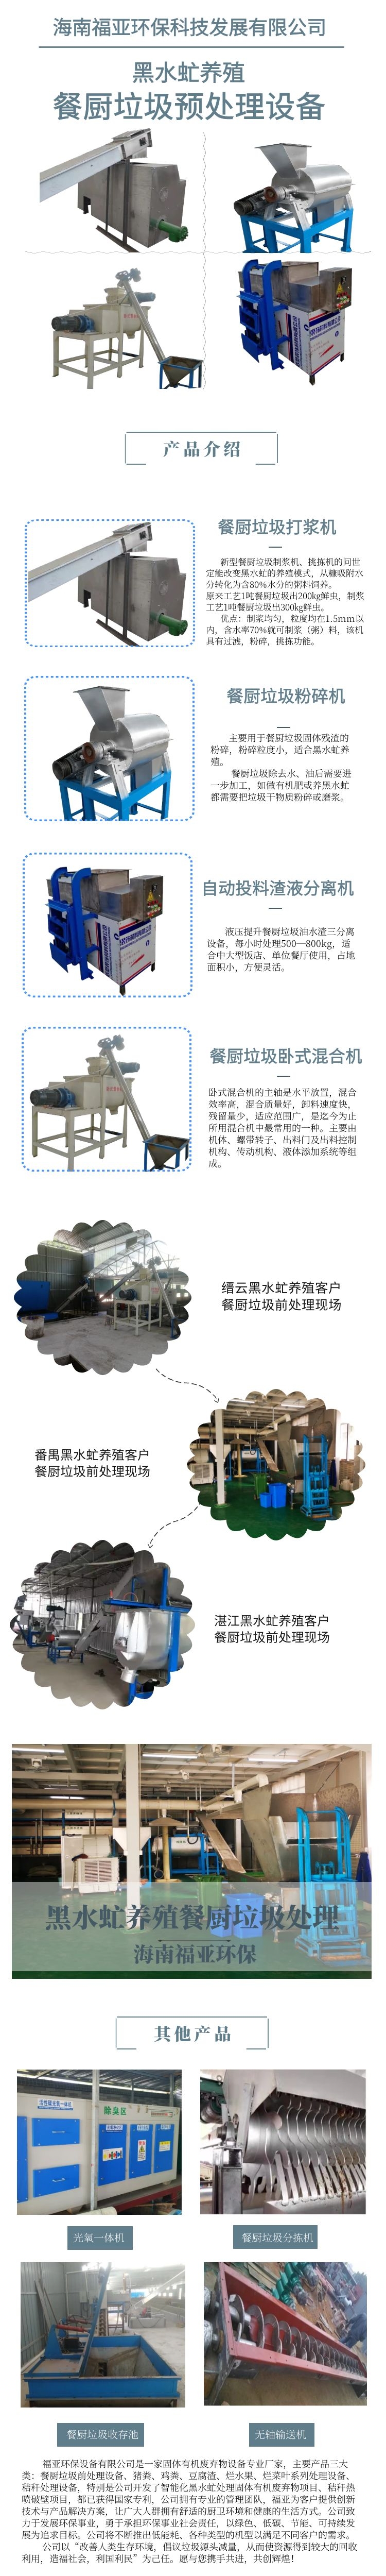 Fuya slag liquid separator solid-liquid separation equipment, three separation integrated machine for oil and water residue extraction